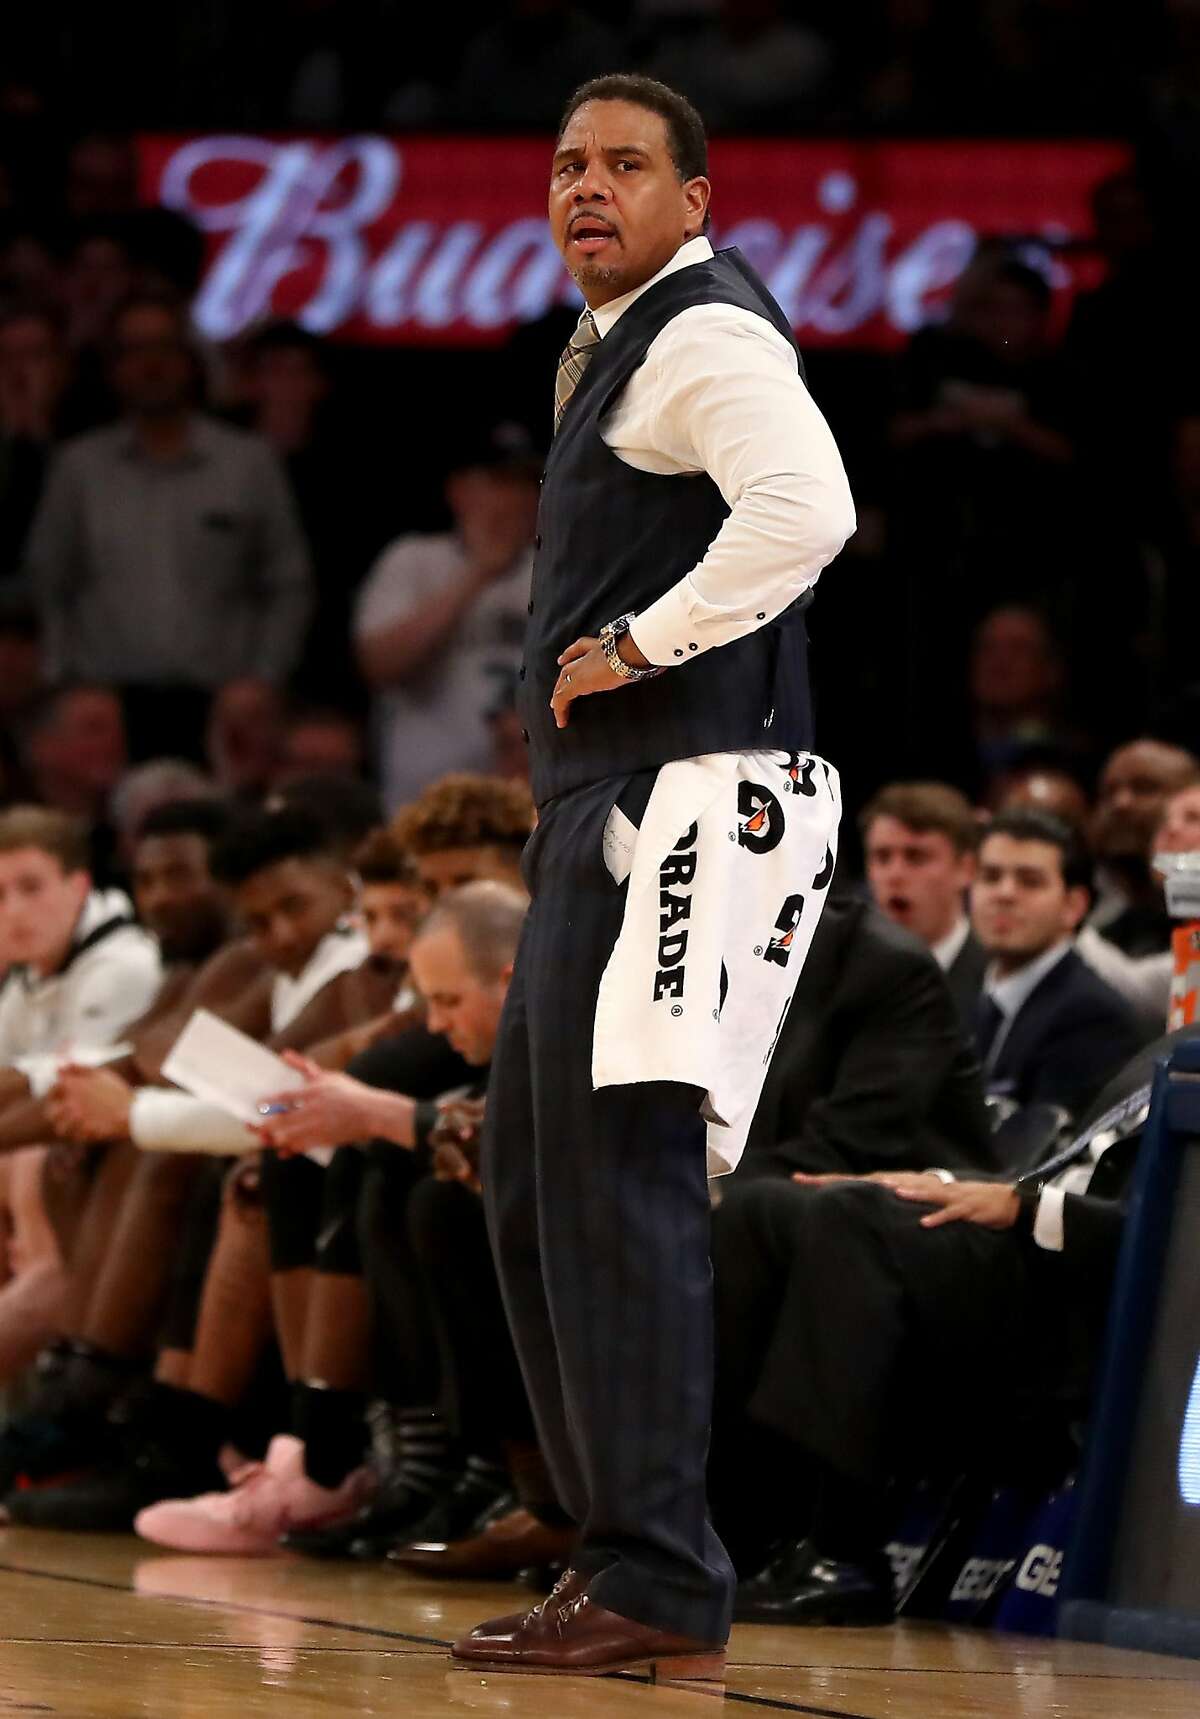 NEW YORK, NY - MARCH 10: Head coach Ed Cooley of the Providence Friars directs his players during the overtime period against the Villanova Wildcats during the championship game of the Big East Basketball Tournament at Madison Square Garden on March 10, 2018 in New York City. (Photo by Elsa/Getty Images)